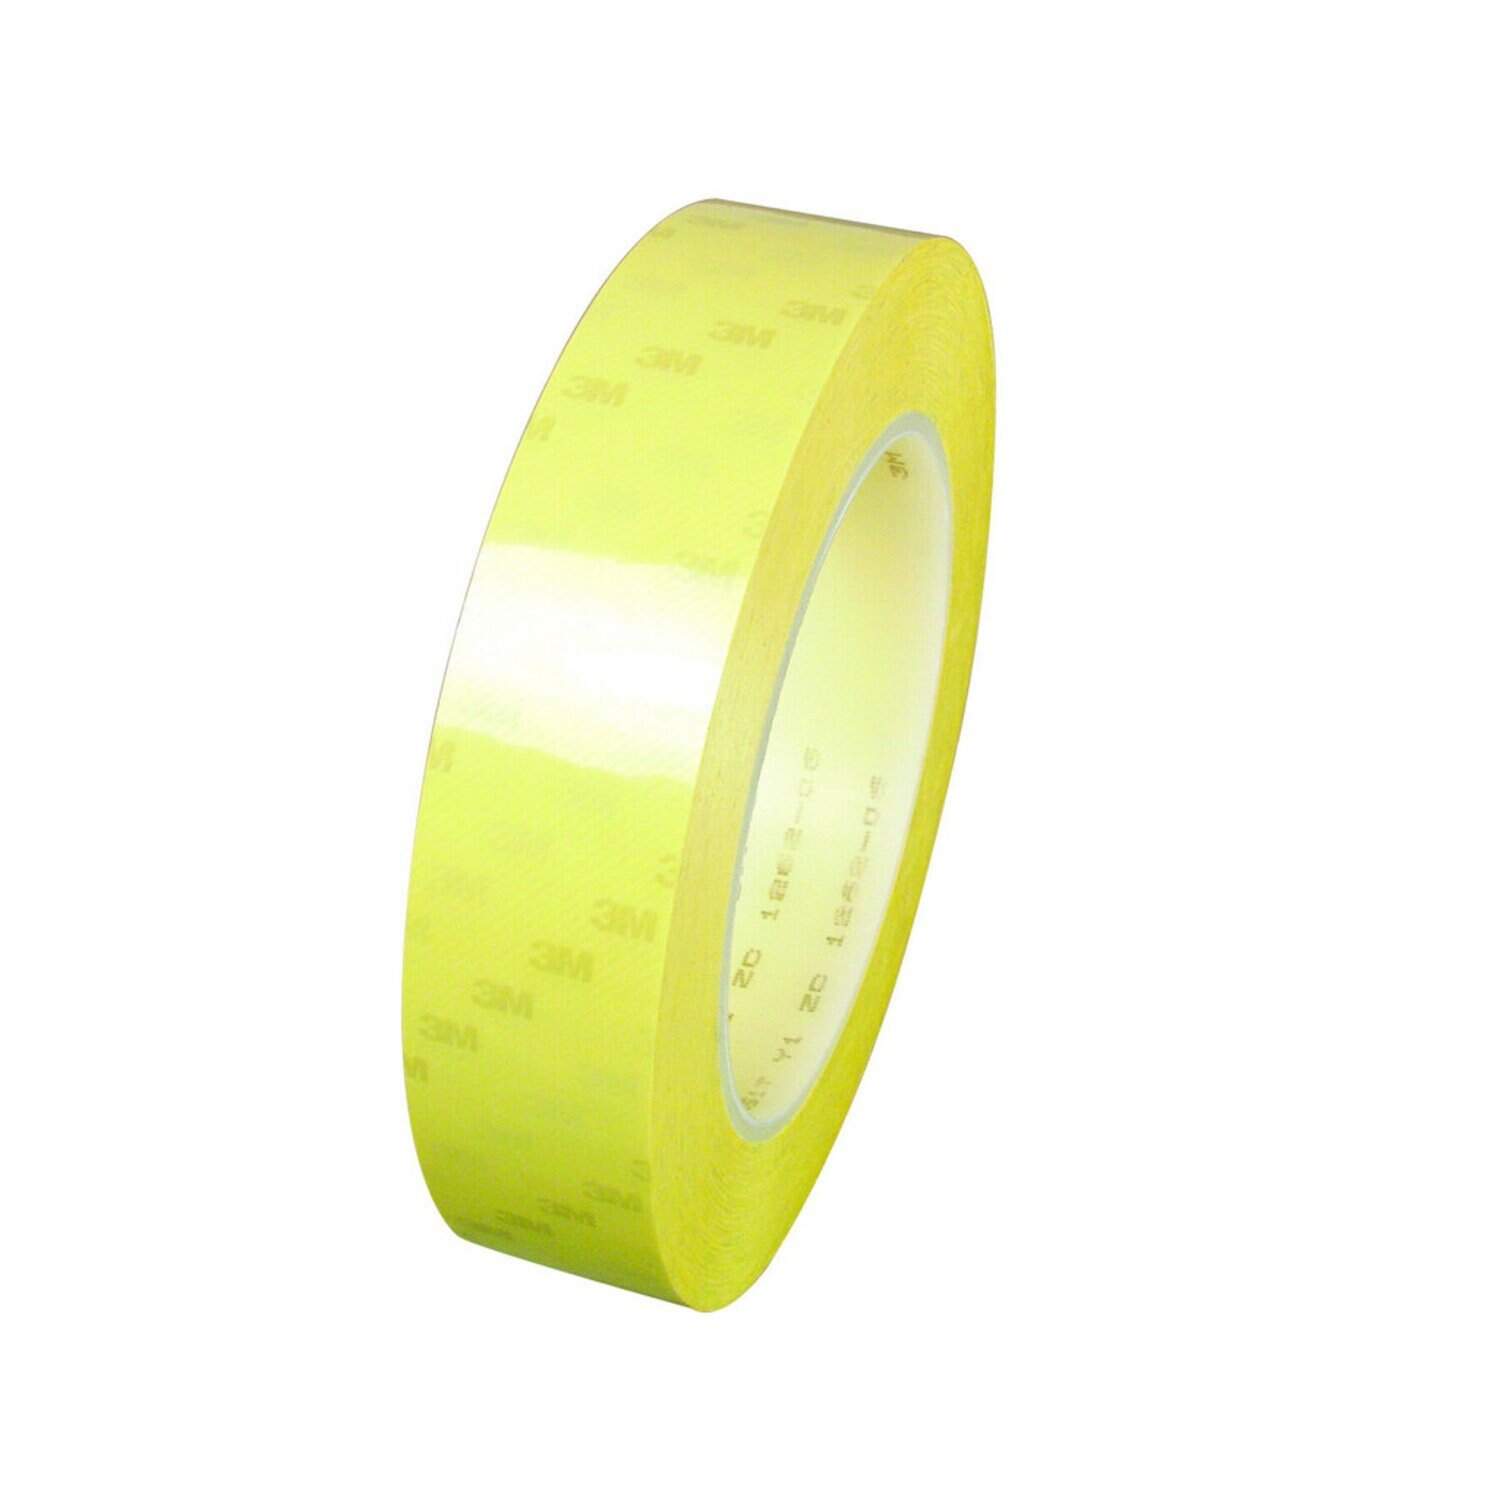 7100074556 - 3M Polyester Film Electrical Tape 56, 3/8 in x 72 yd, Yellow, 96
Rolls/Case